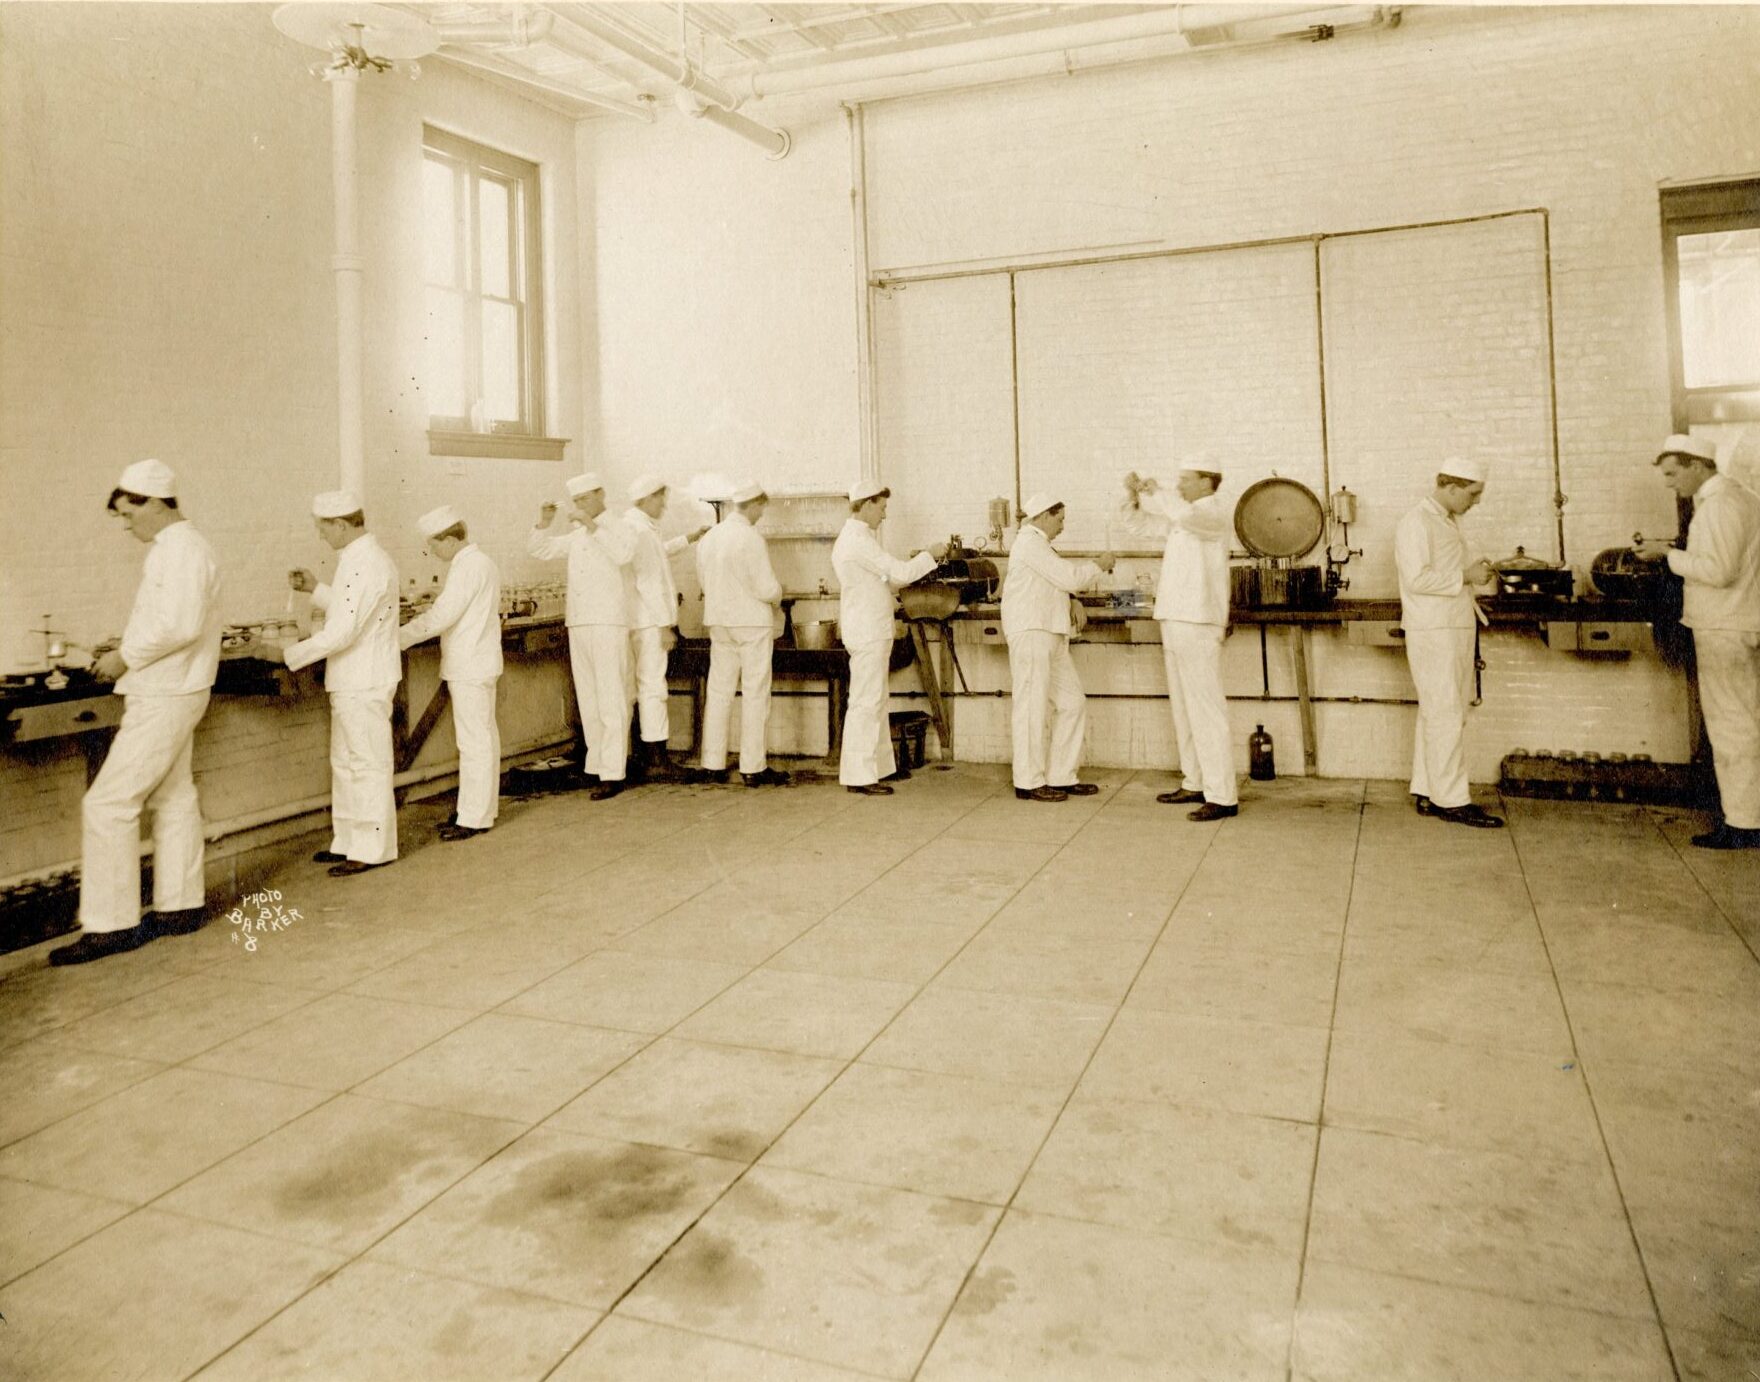 Dairy School students in white uniforms working with buttermaking equipment in a laboratory.